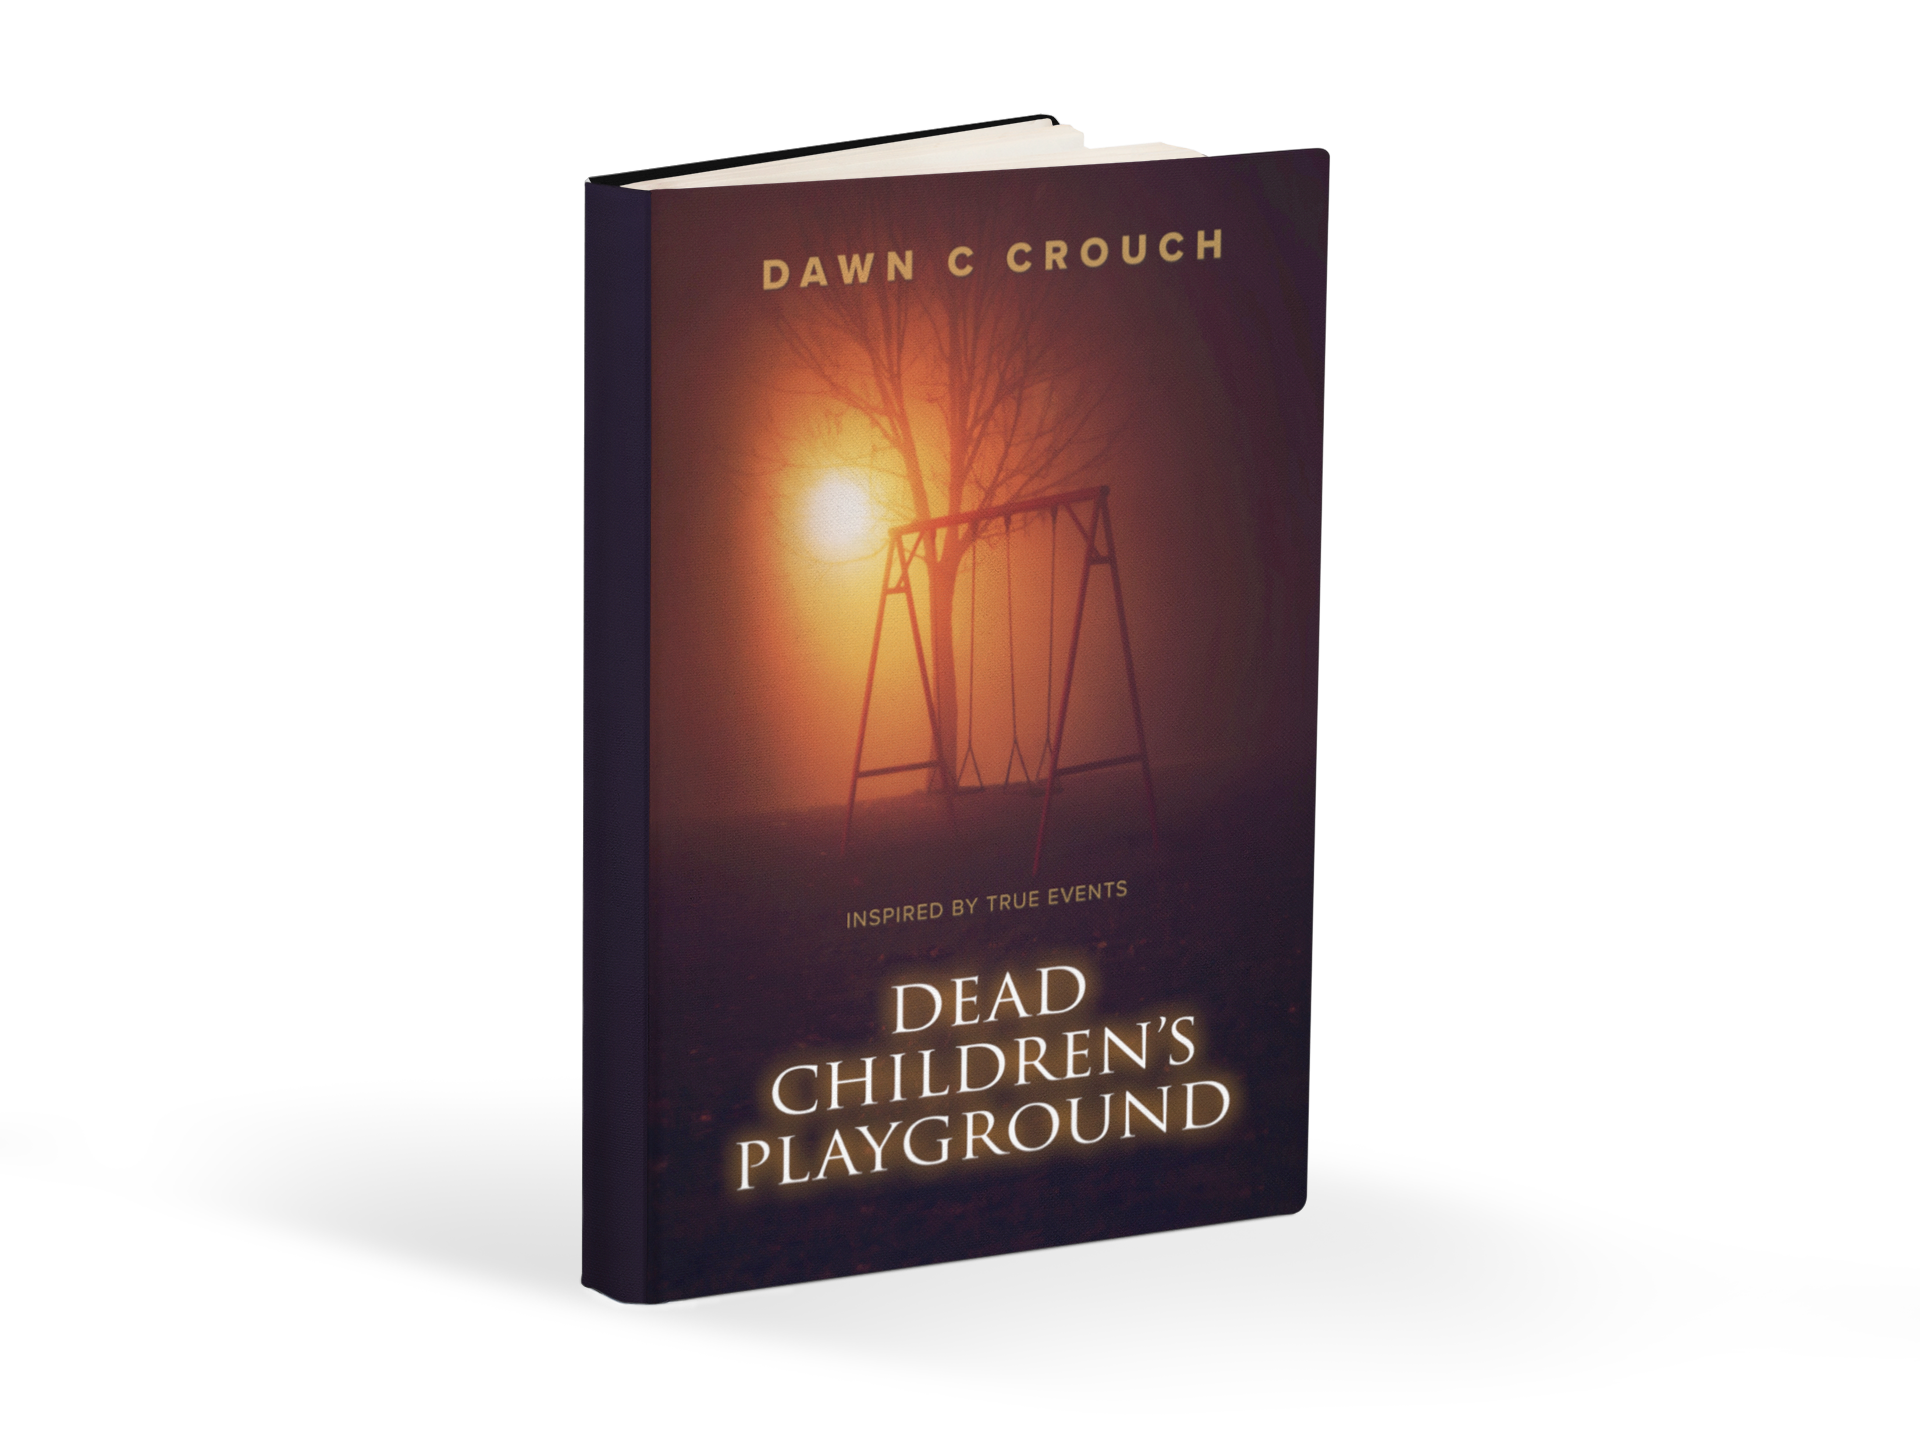 Dead Children's Playground by Dawn C Crouch Brings to Life an Eerie Rocket City Urban Legend